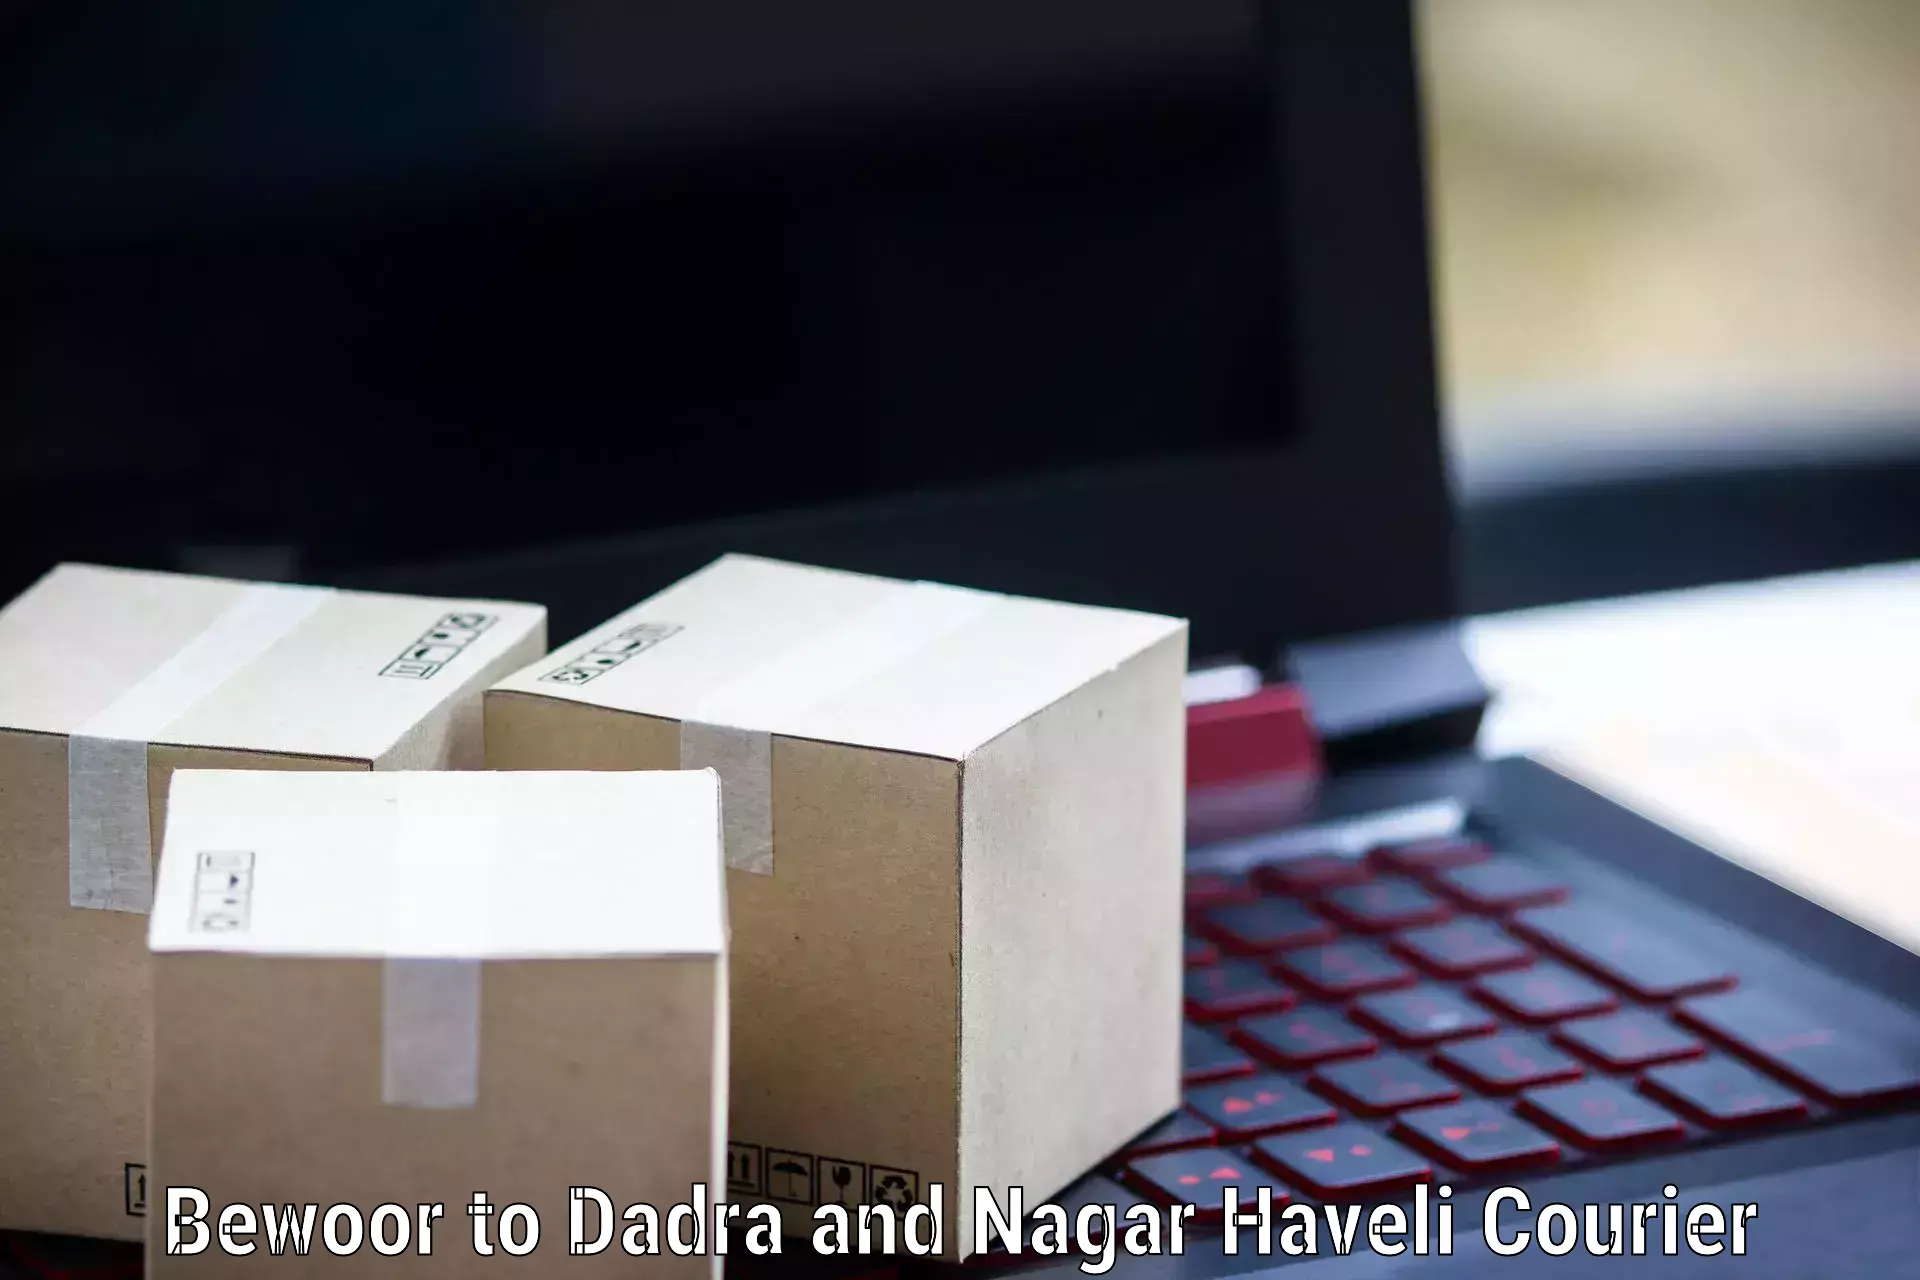 Reliable parcel services Bewoor to Dadra and Nagar Haveli